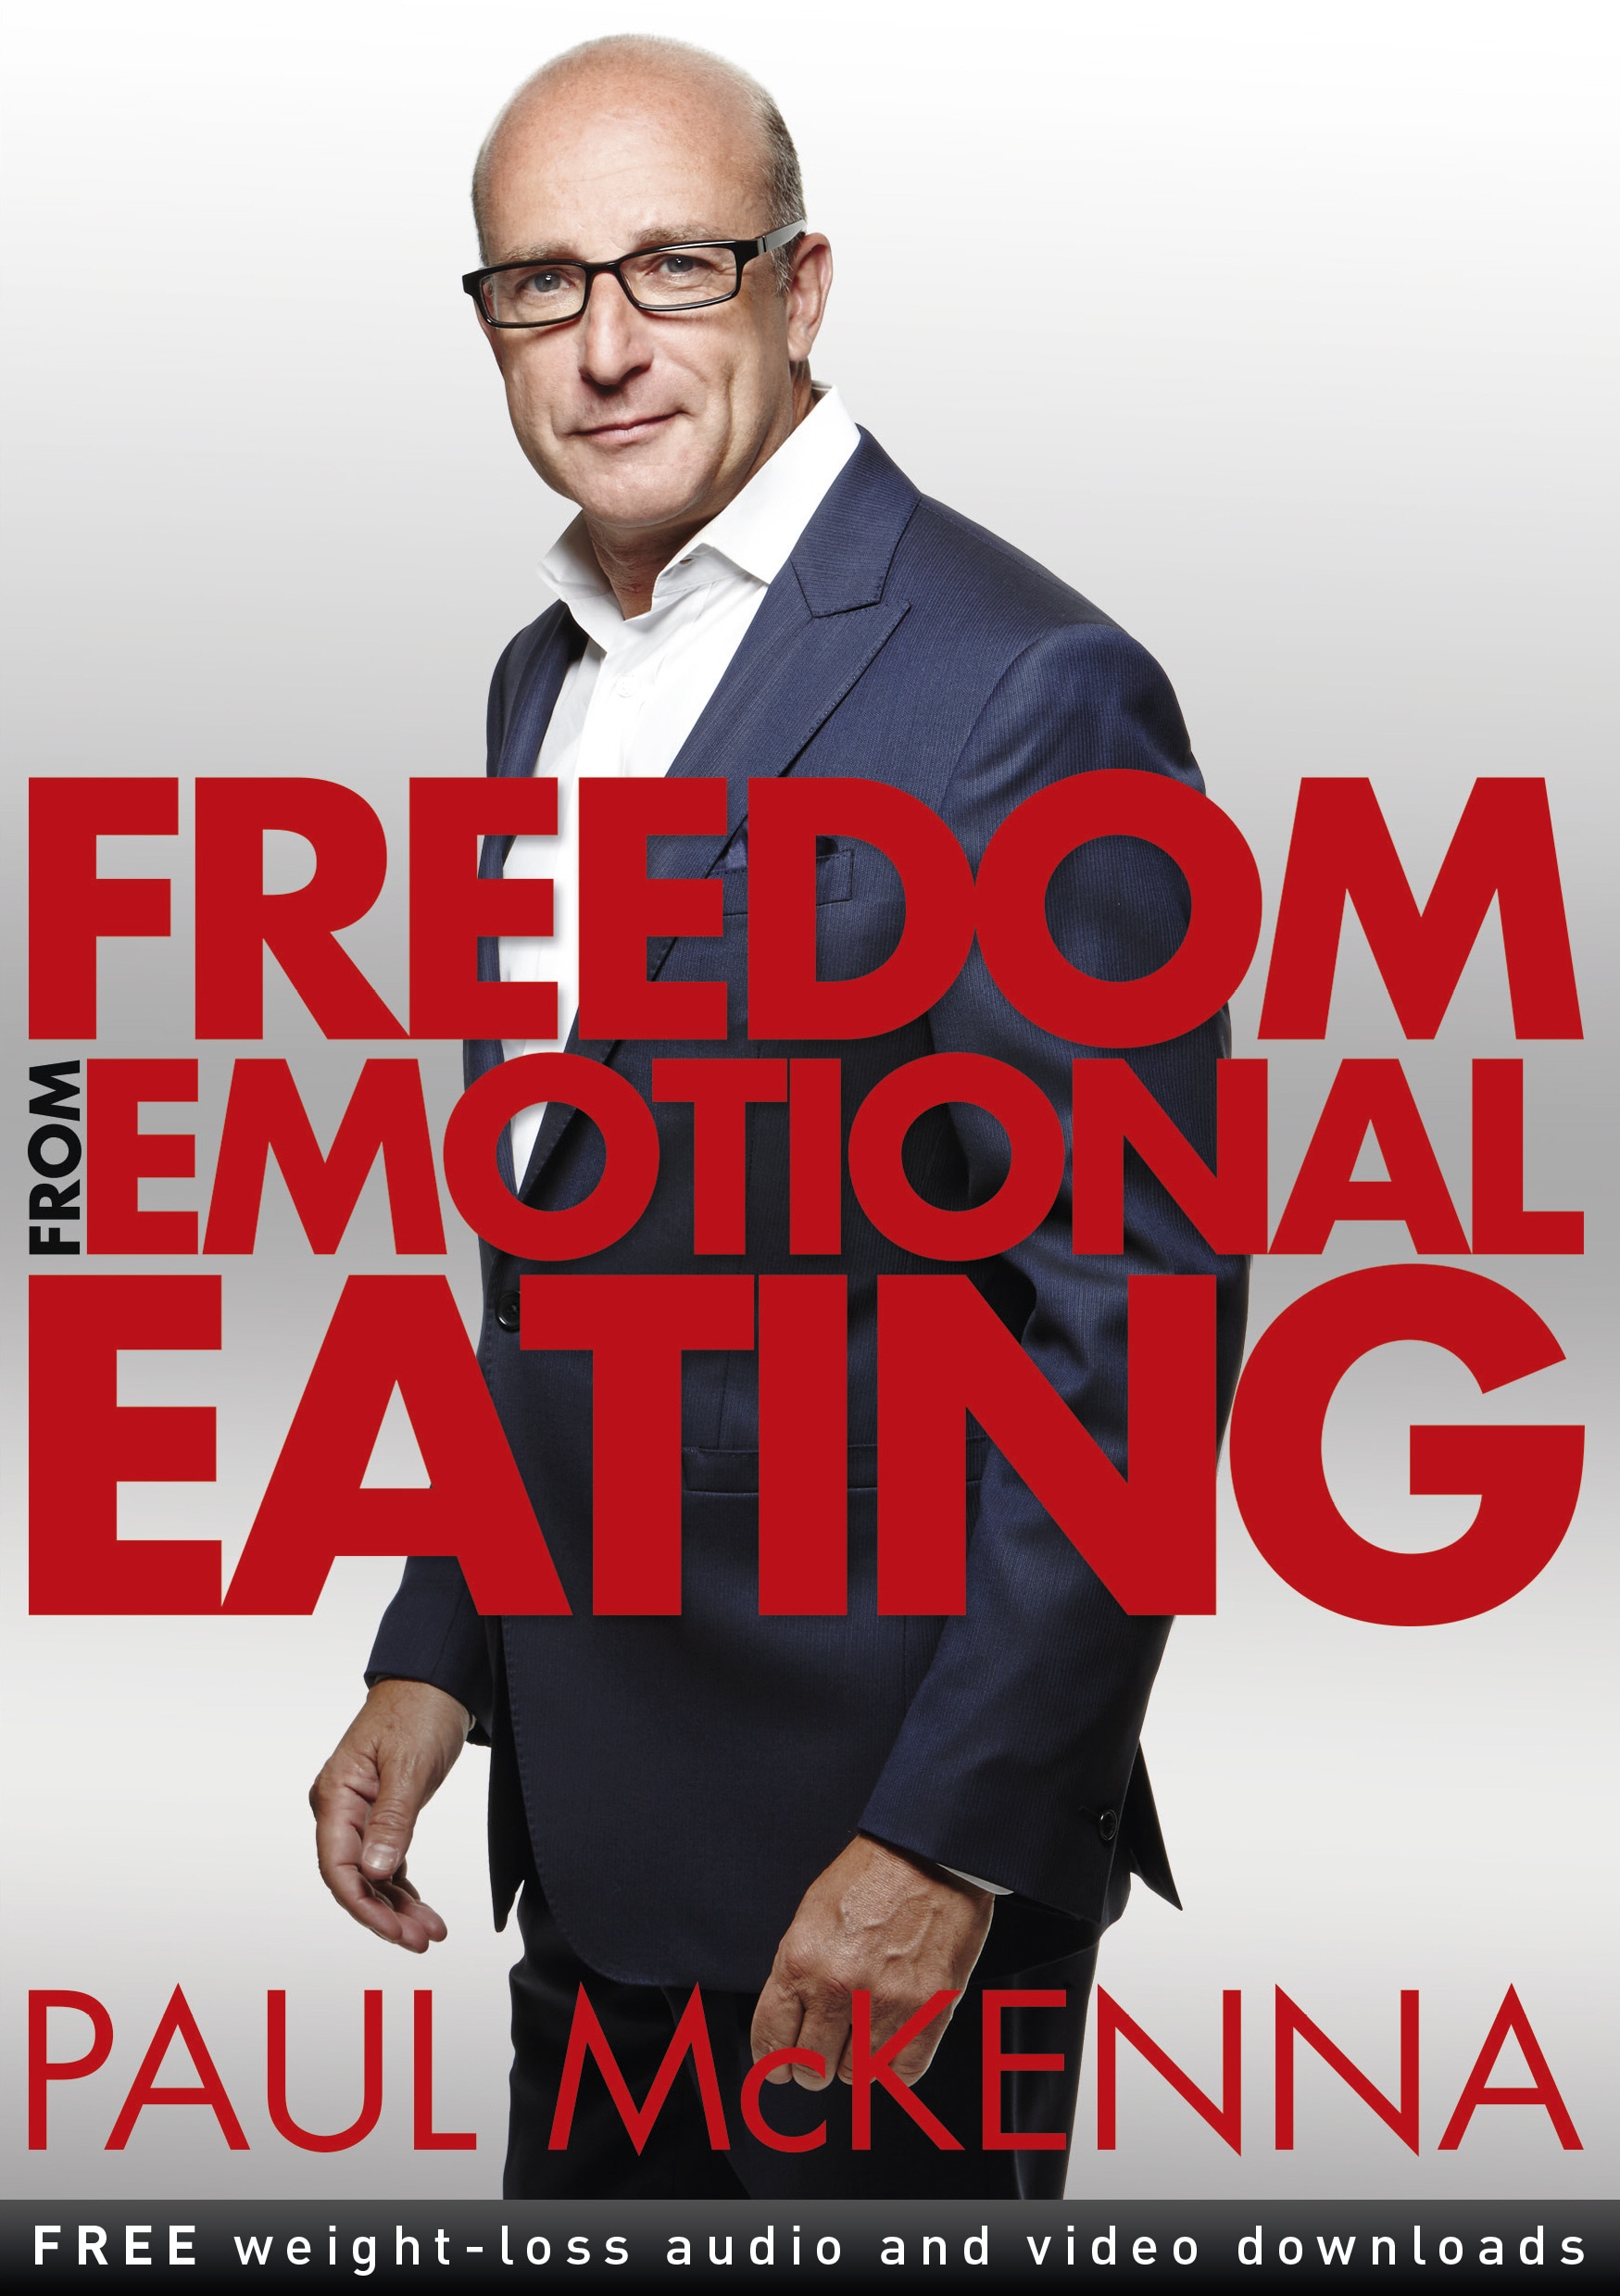 Book “Freedom from Emotional Eating” by Paul McKenna — July 11, 2019